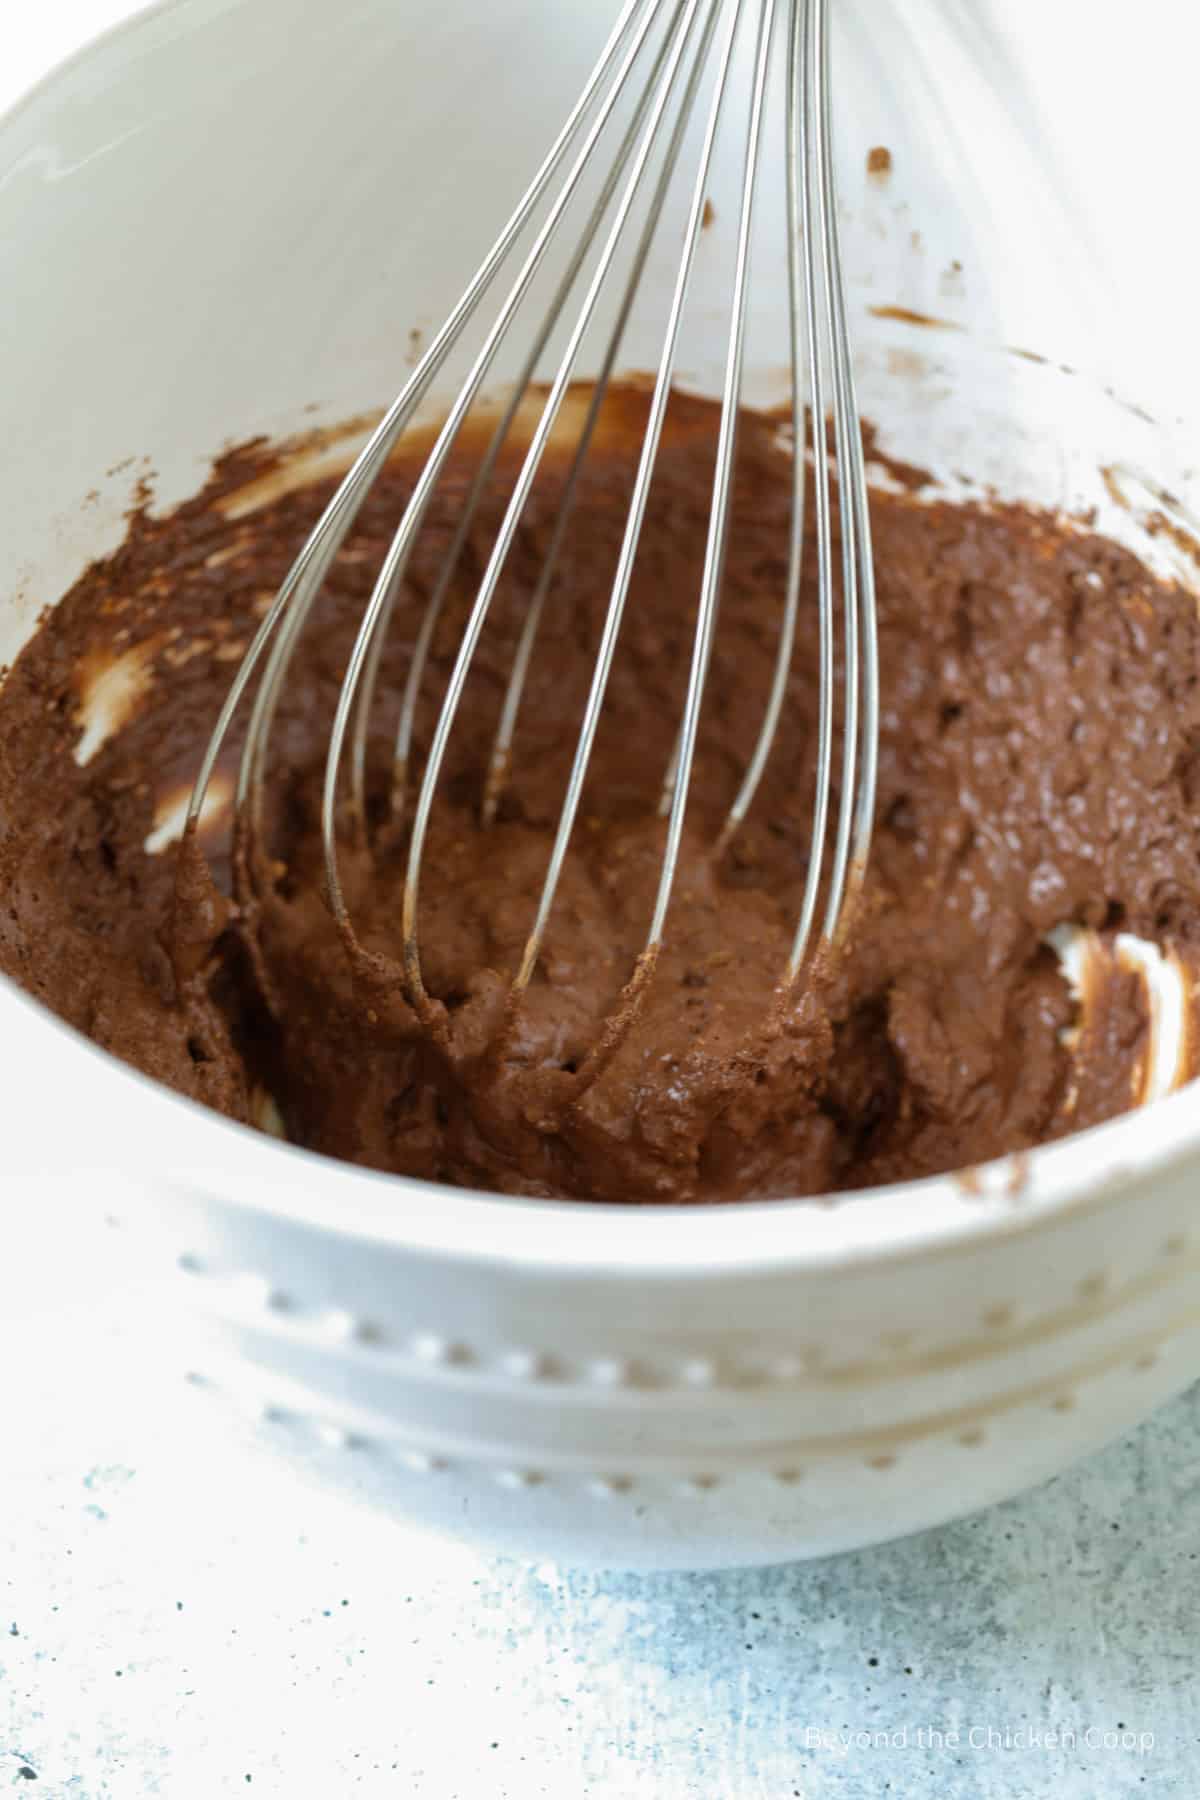 Thick chocolate mixture in a bowl.